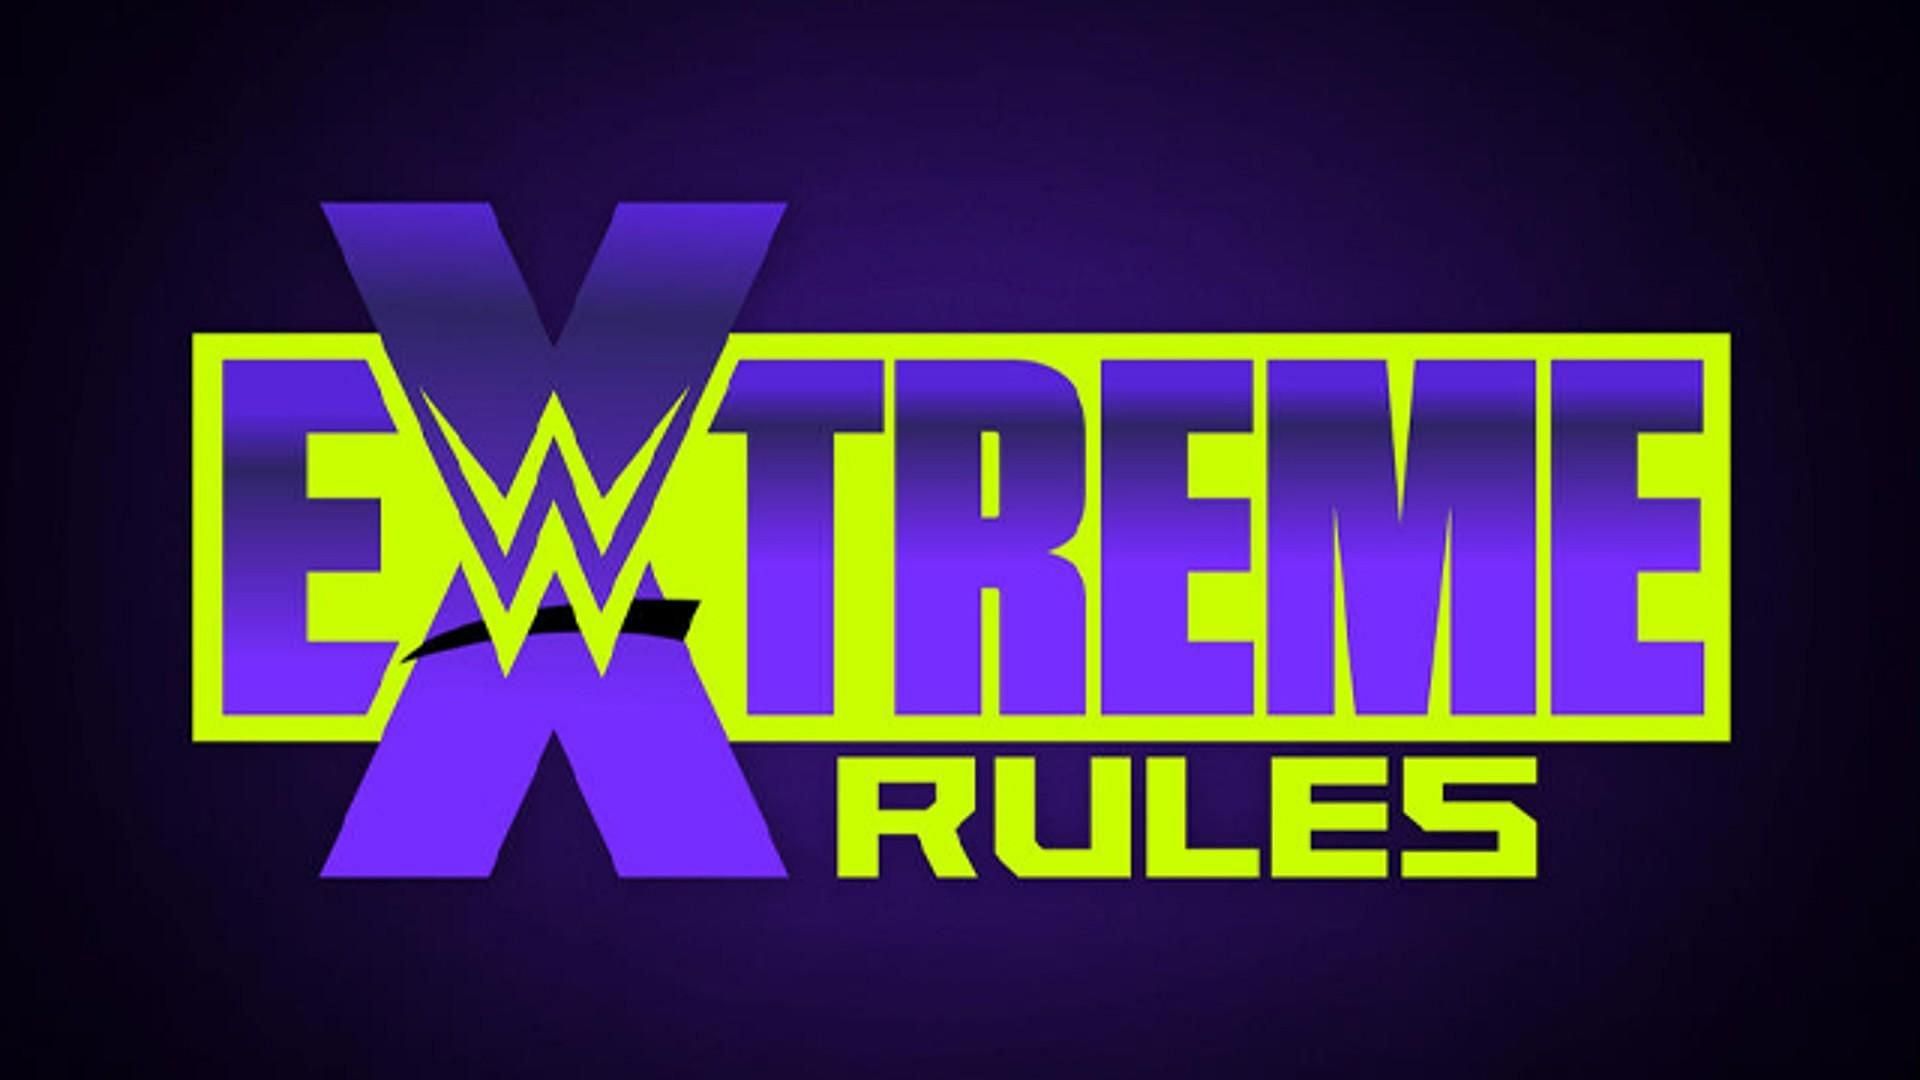 WWE Extreme Rules 2022 is shaping up to become a cracker